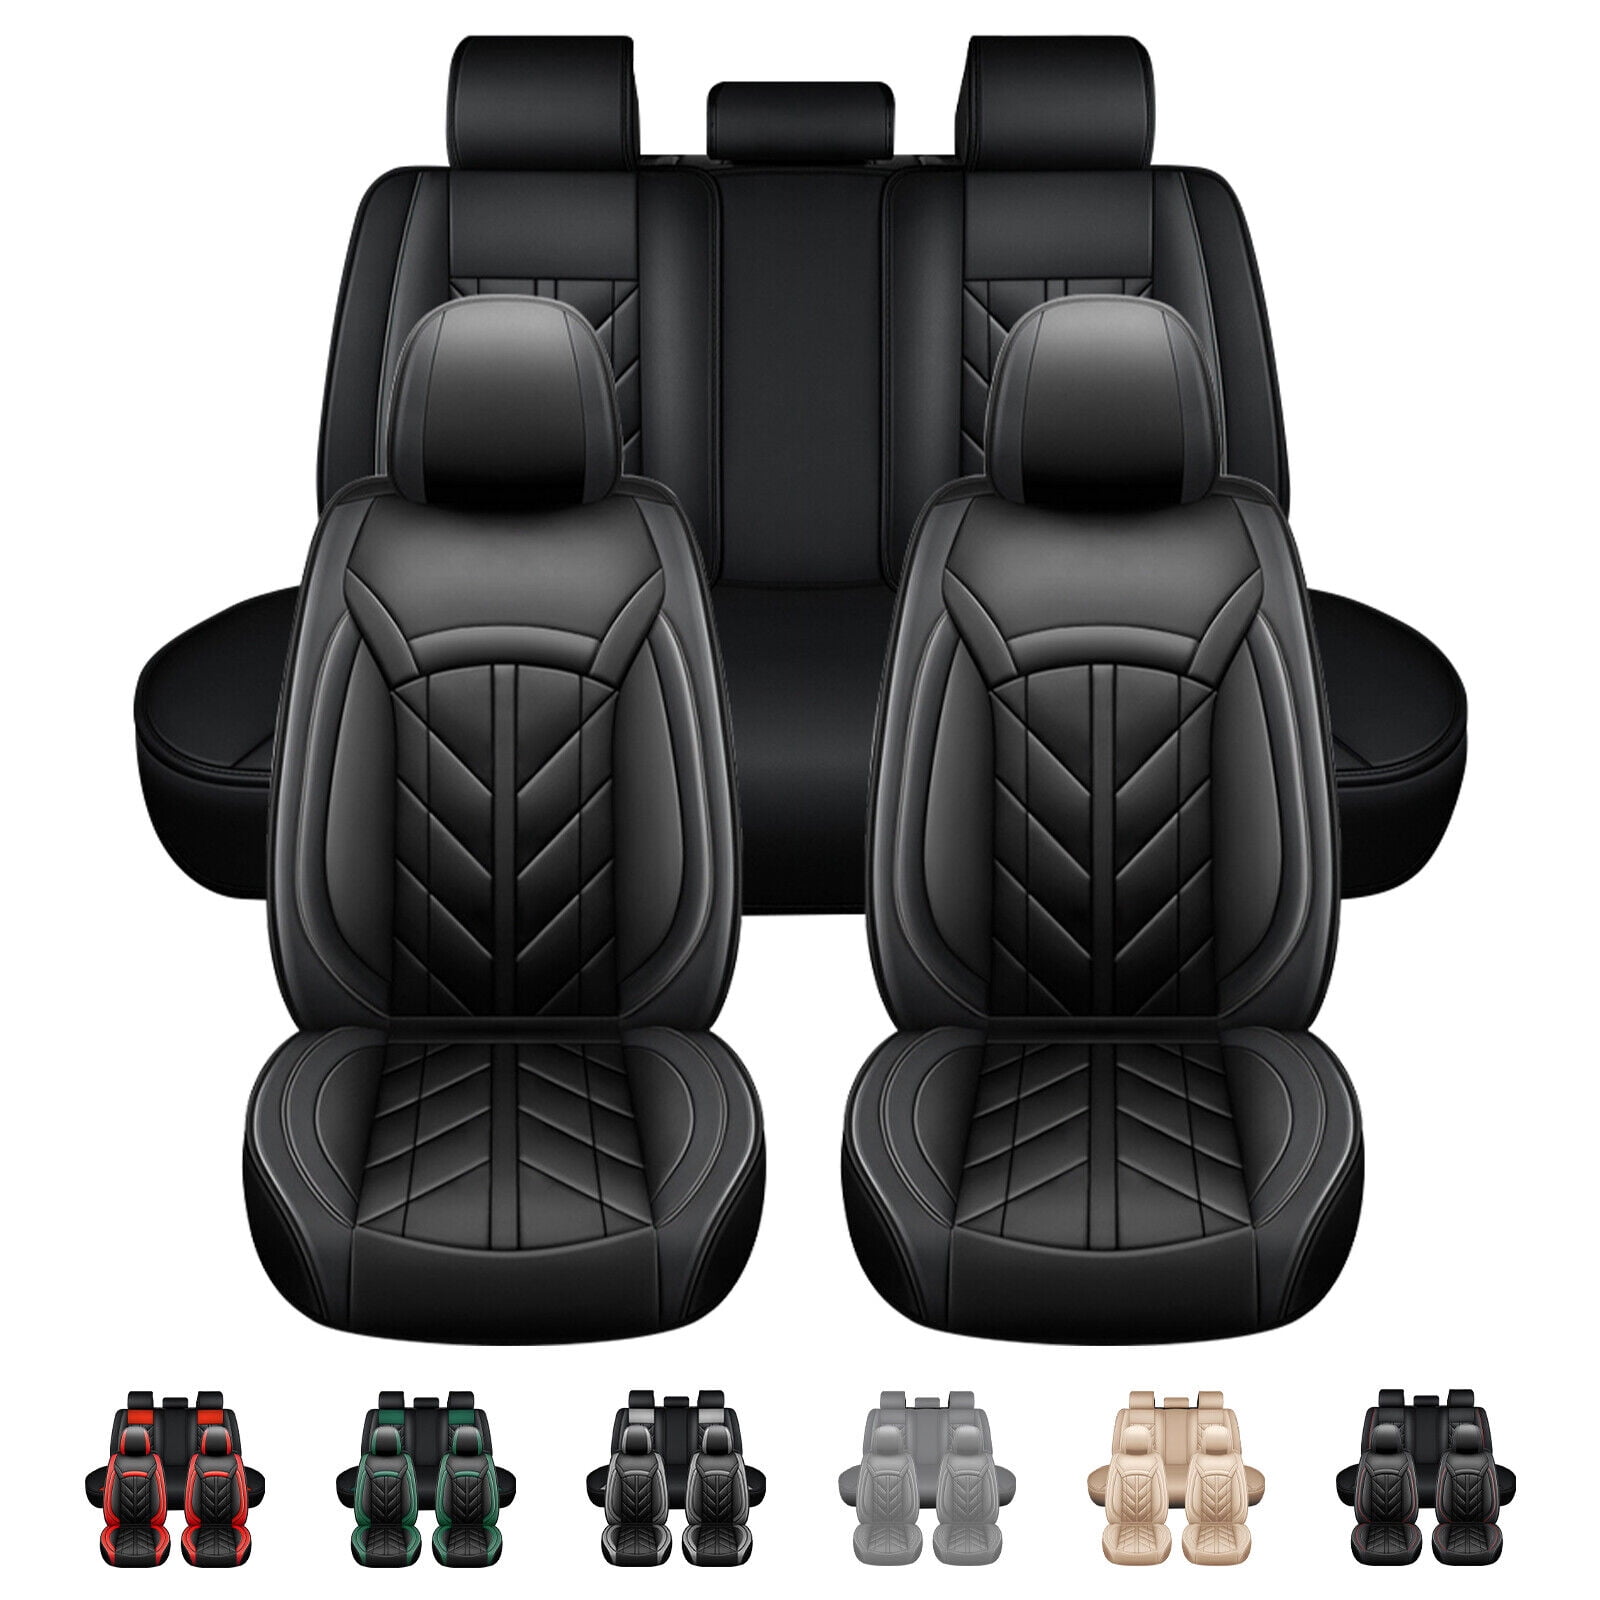 Car Seat Cover for Chevy 5 Seats Full Set, Wear-resistant Pu